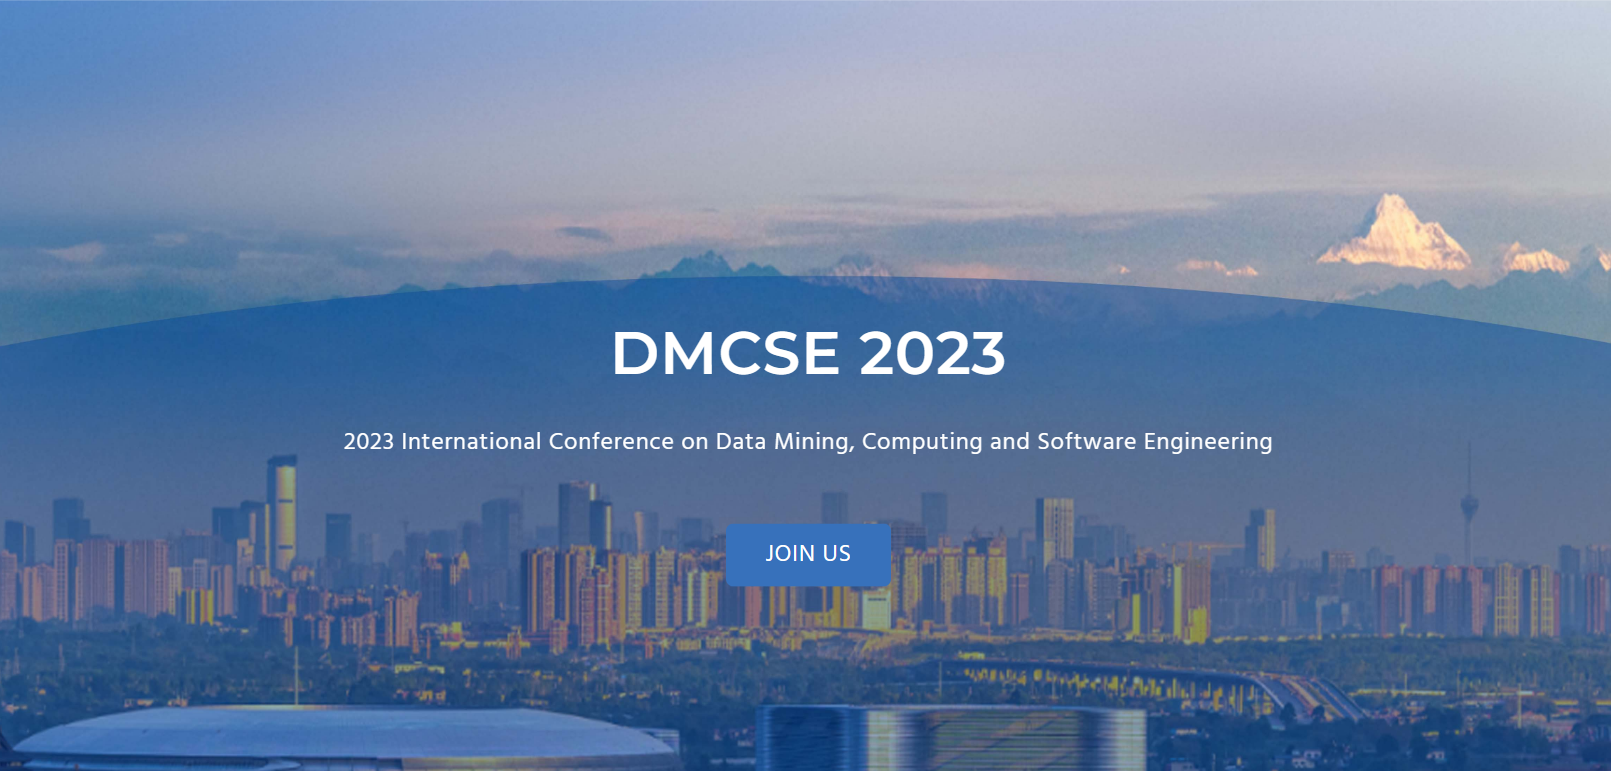 2023 International Conference on Data Mining, Computing and Software Engineering (DMCSE 2023) -EI Compendex, Chengdu, Sichuan, China